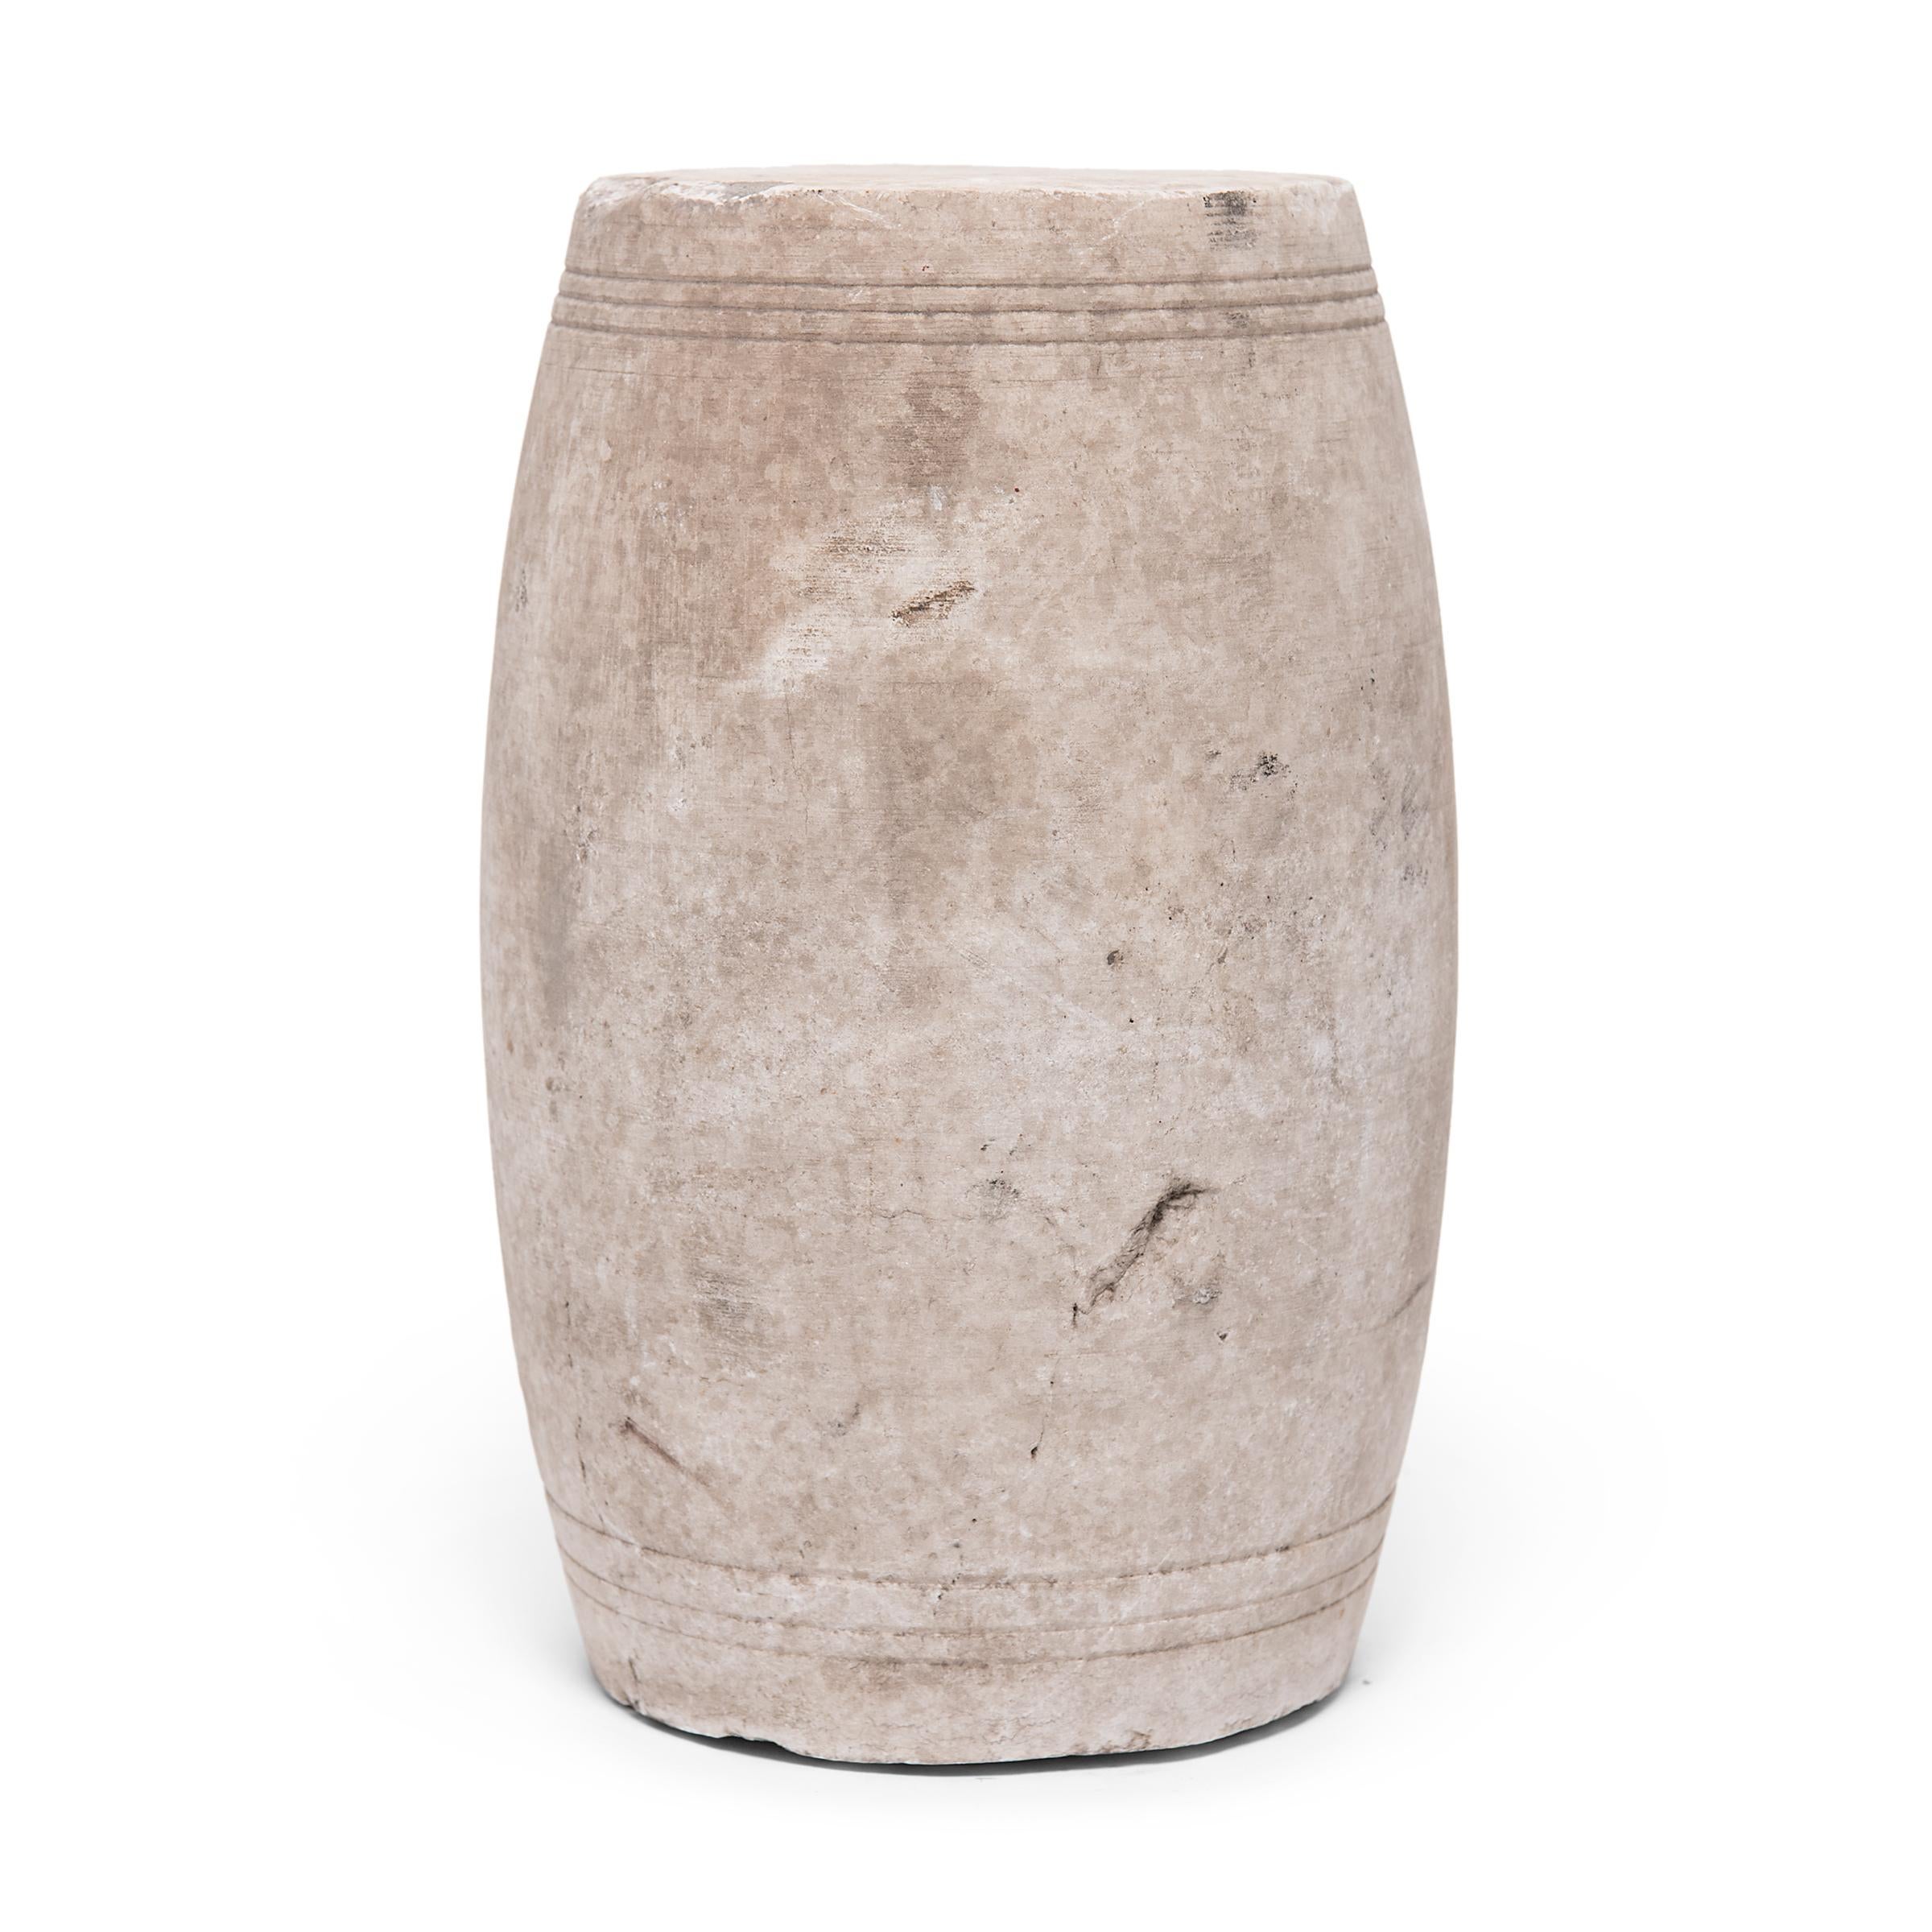 This minimalist drum stool was carefully carved from a single block of marble by artisans in China's Shanxi province. Drum-form stools such as this were traditionally used in gardens and outdoor pavilions where upper class scholars read, wrote,